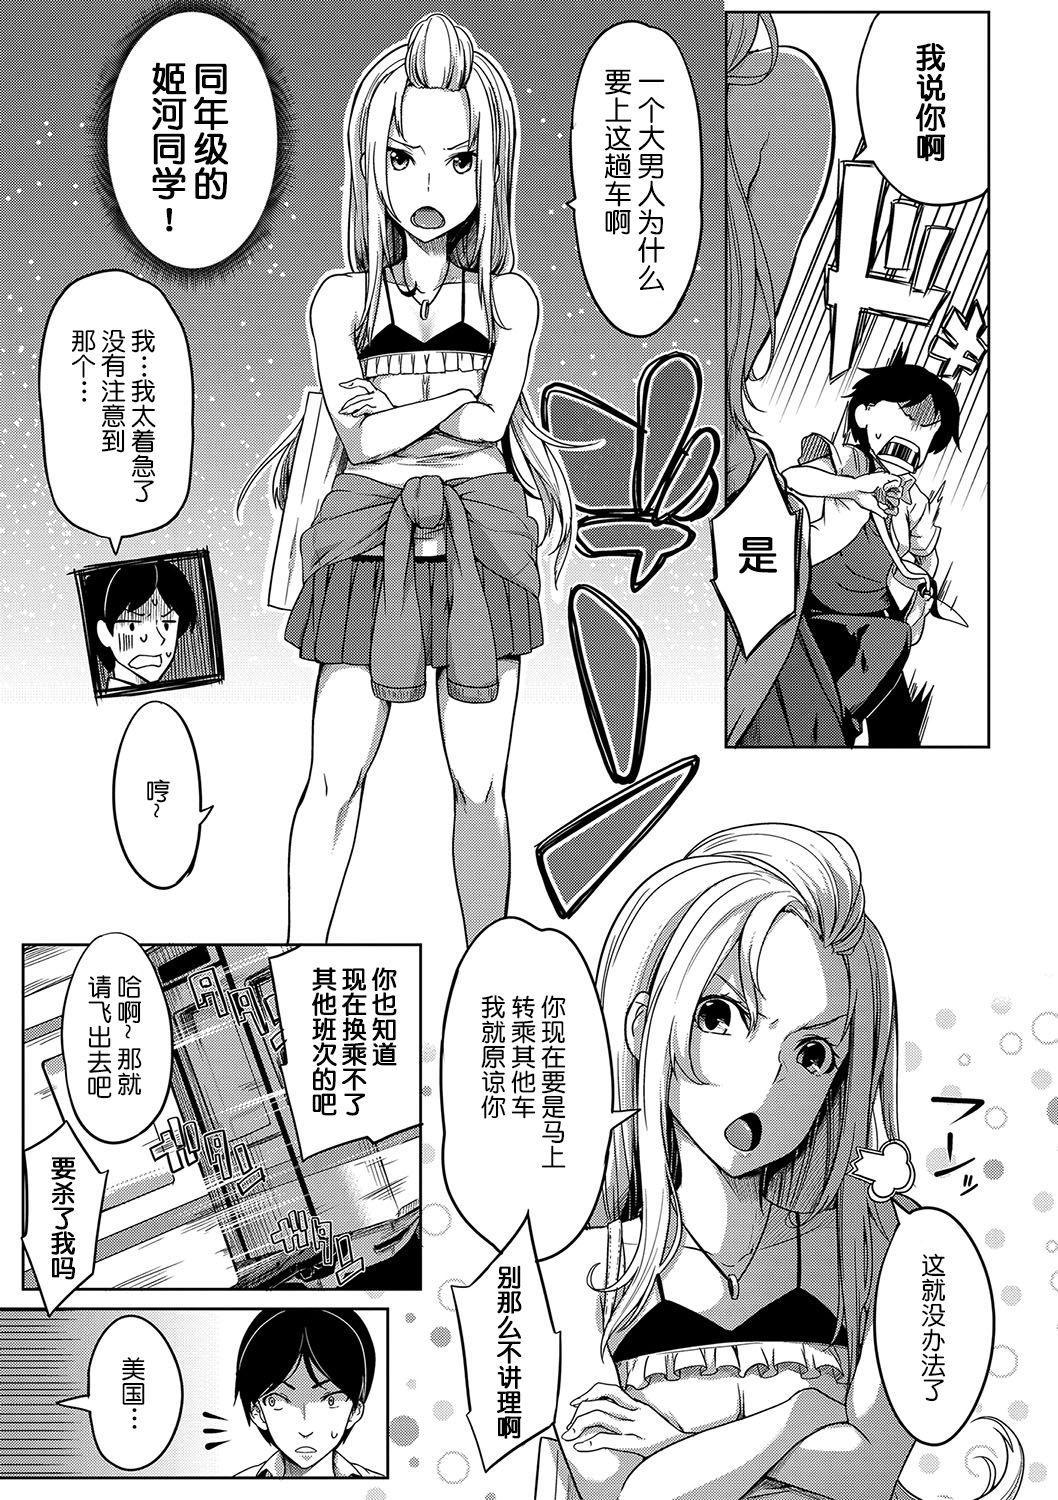 Secret Oppai Switch Oiled - Page 4